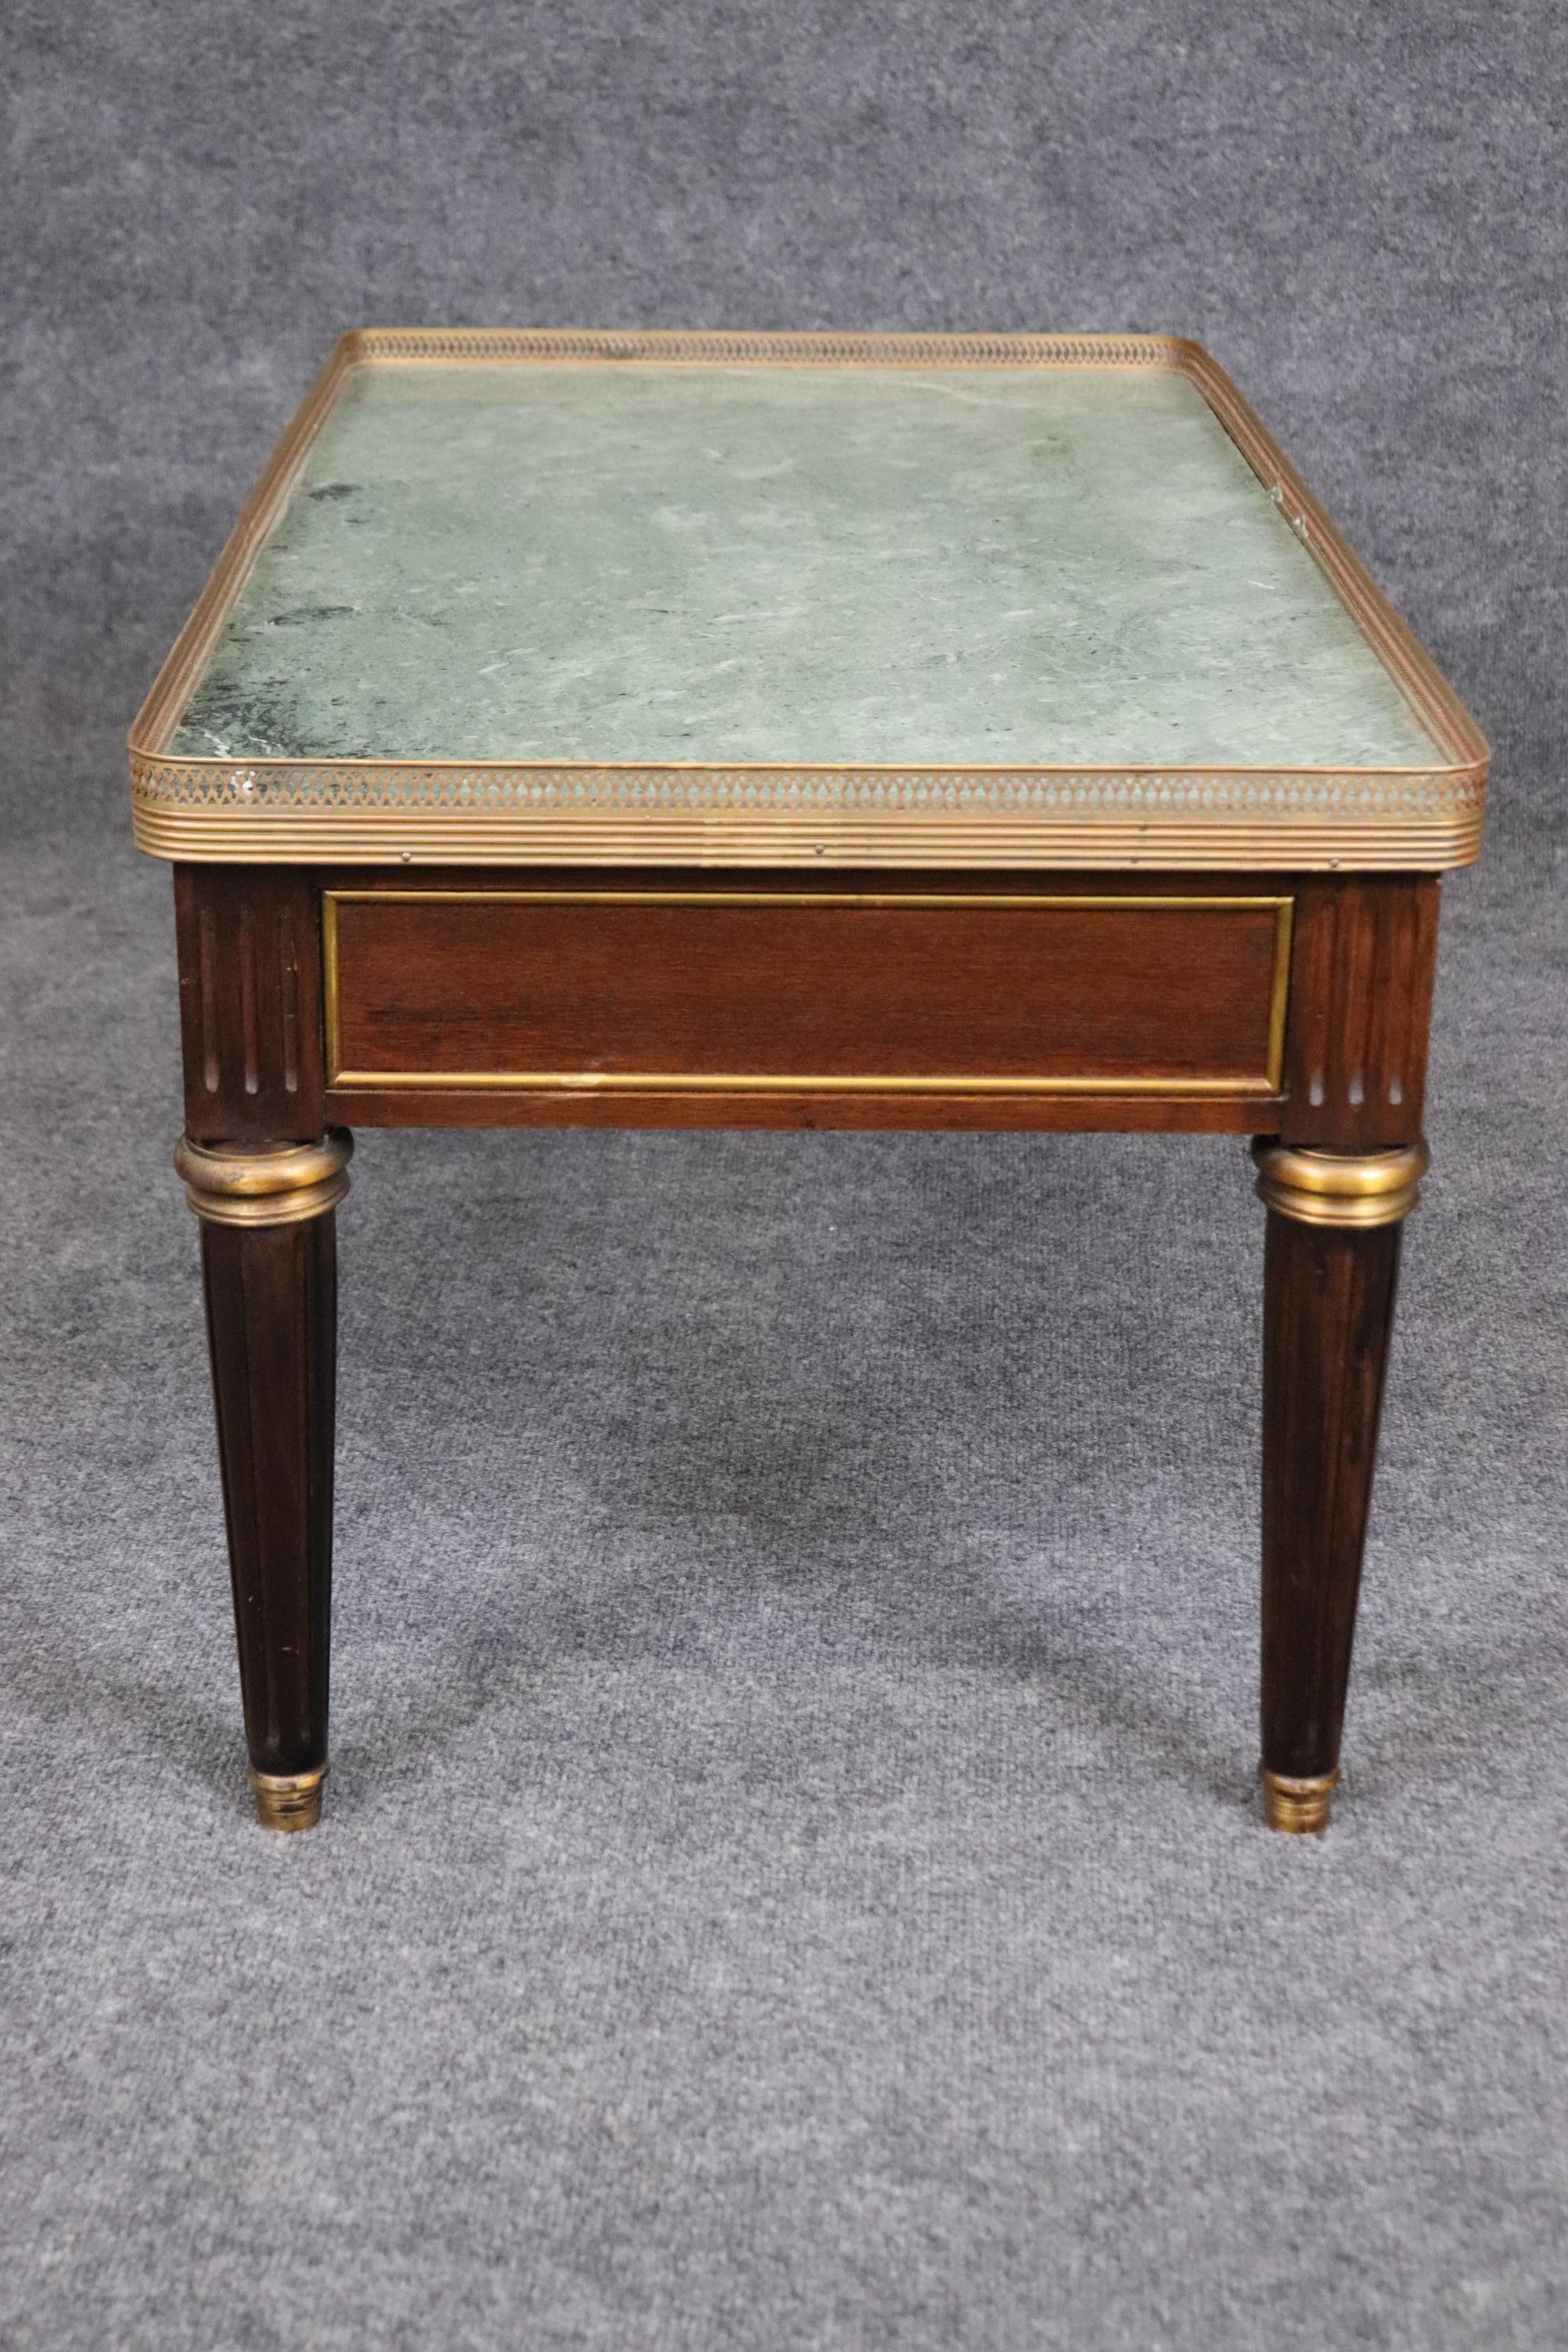 Argentine Louis XVI Style Marble Top Coffee Table Attributed to Maison Jansen